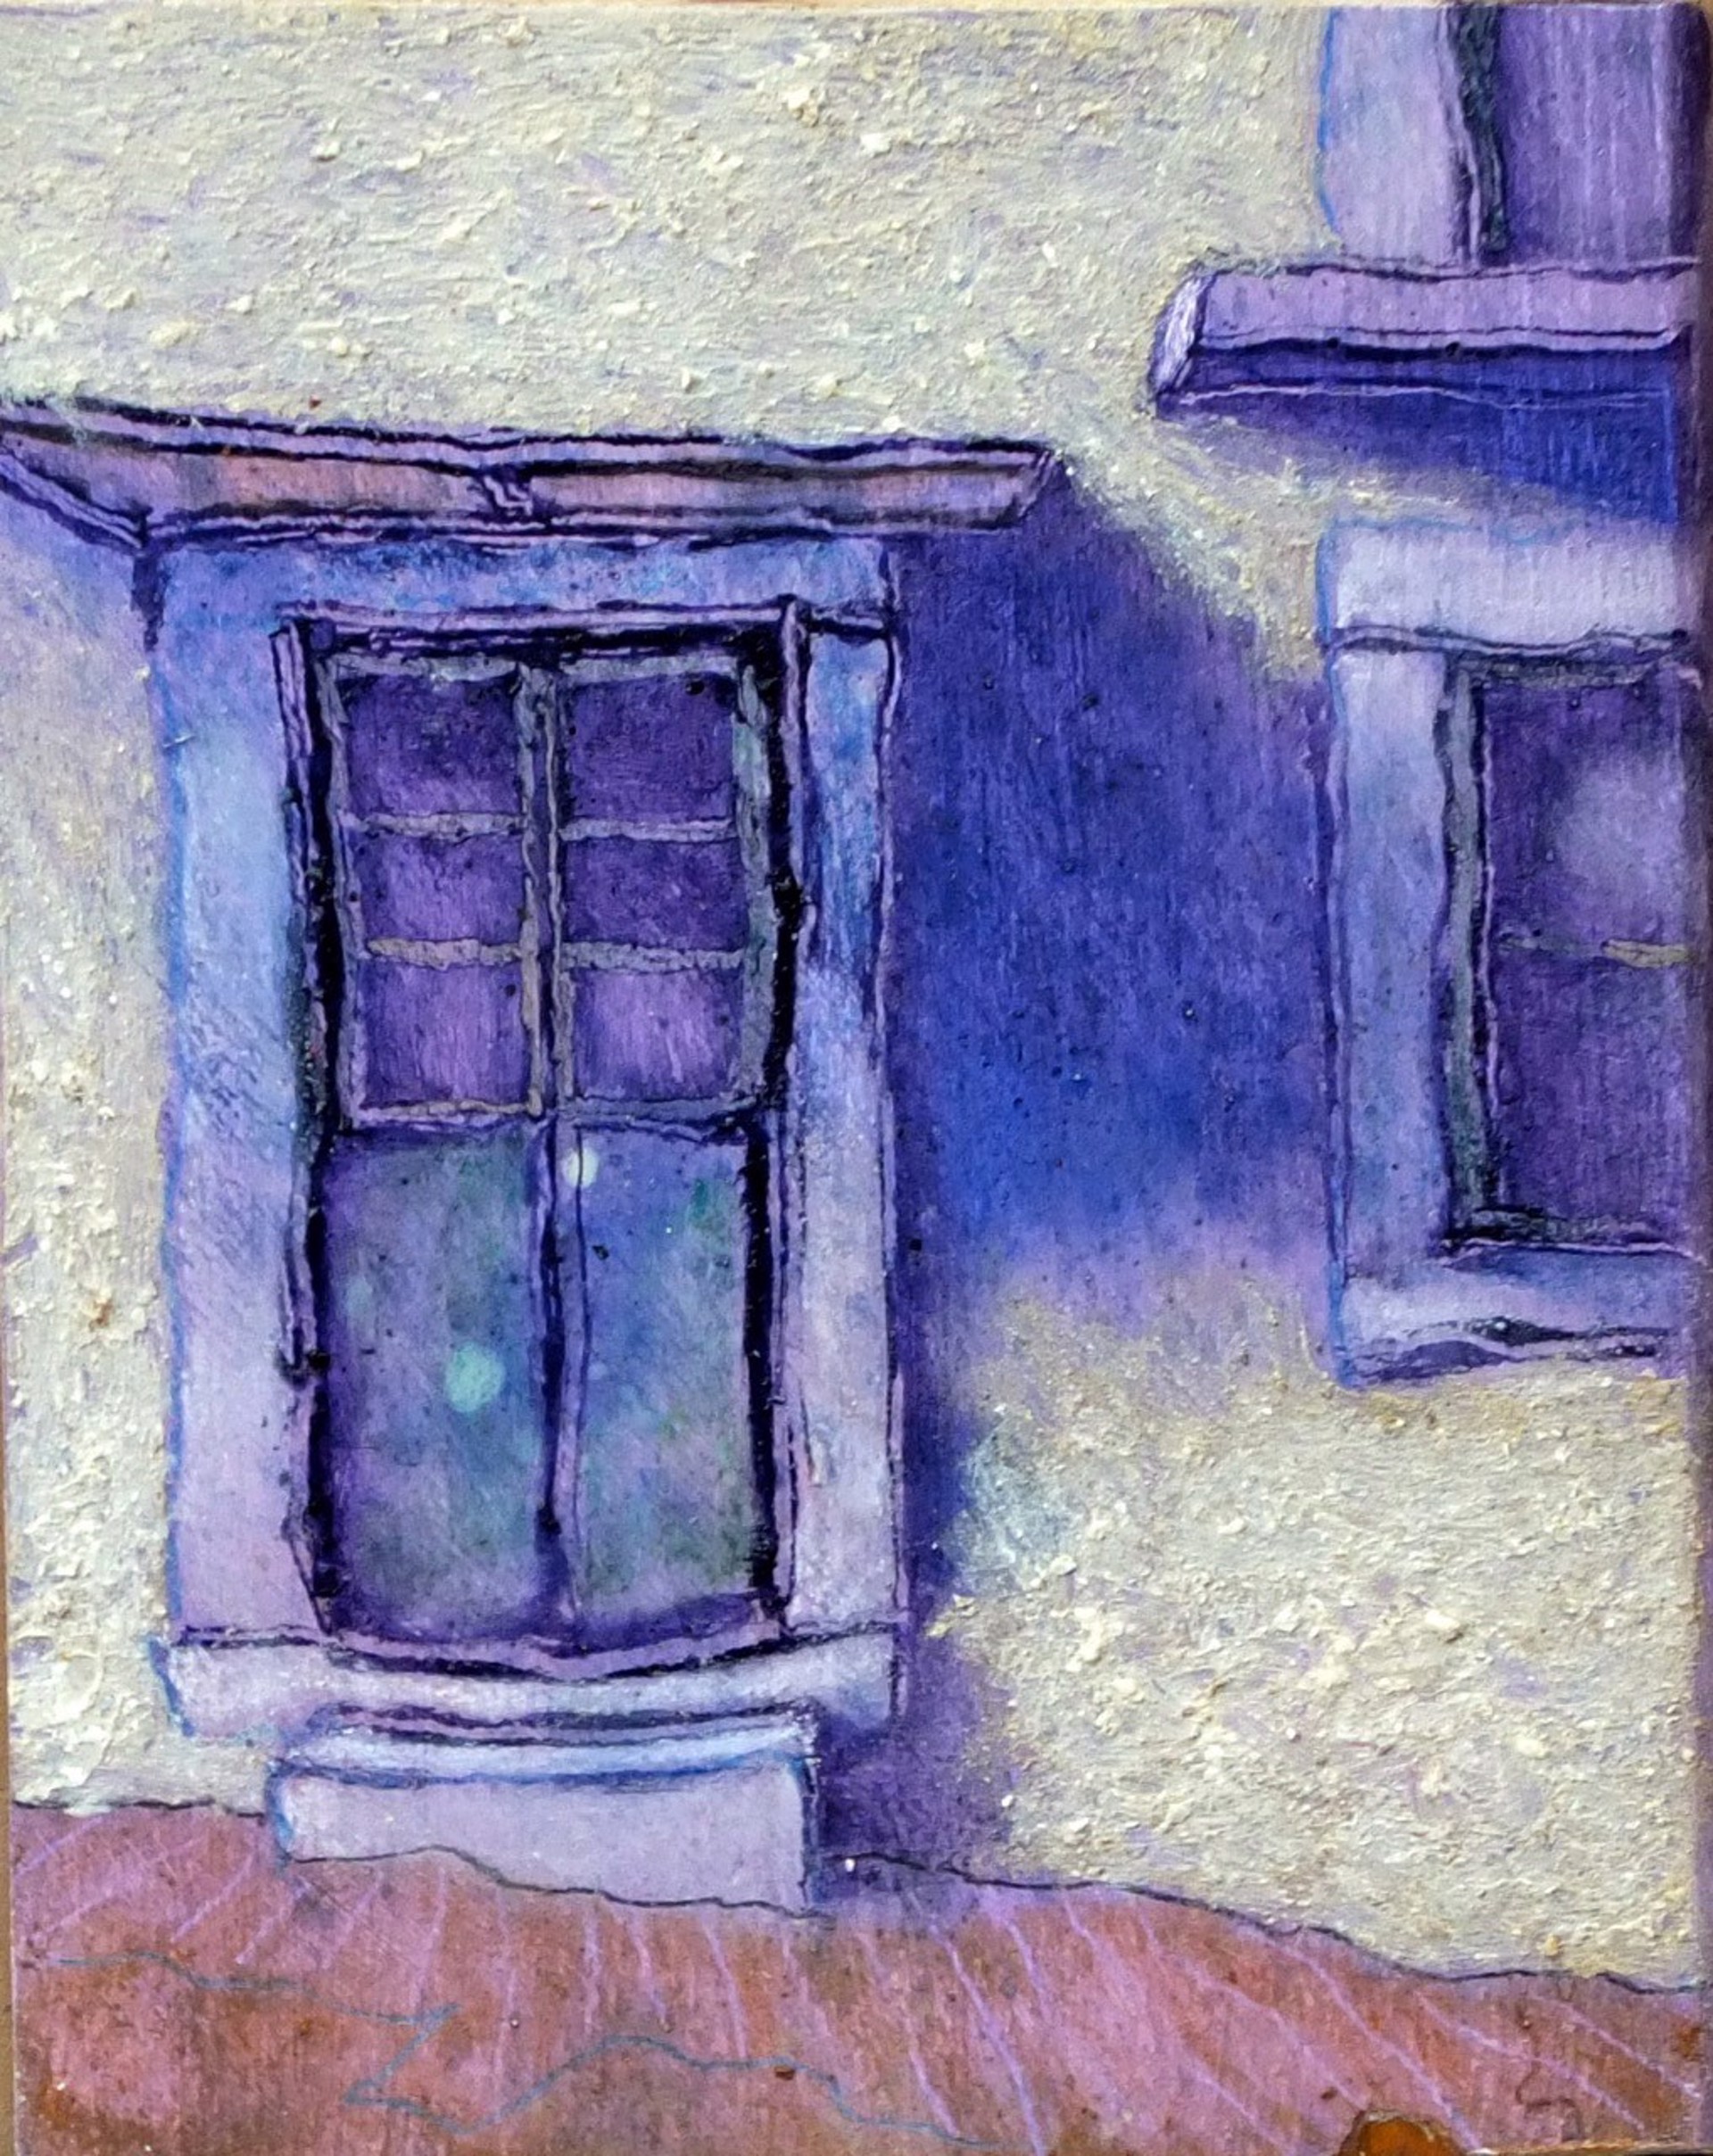 Facade with Door and Window  (Belém, Lisbon) by Andy Newman